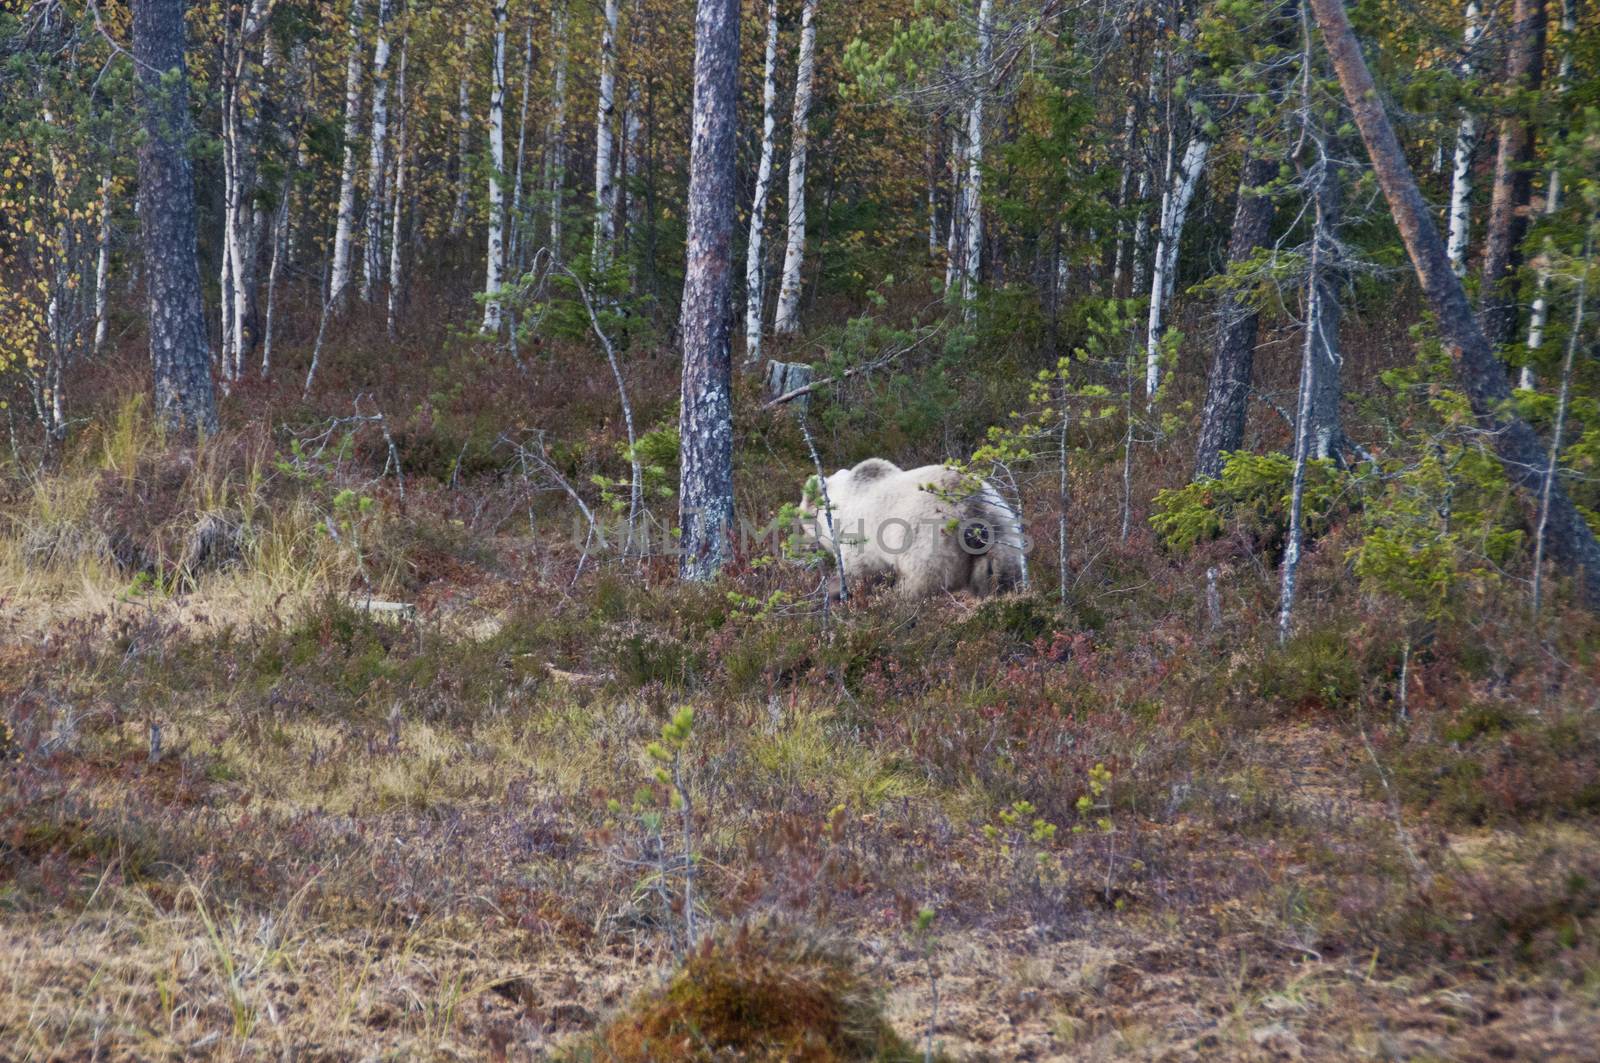 A brown bear in the region of Kainuu, Finland